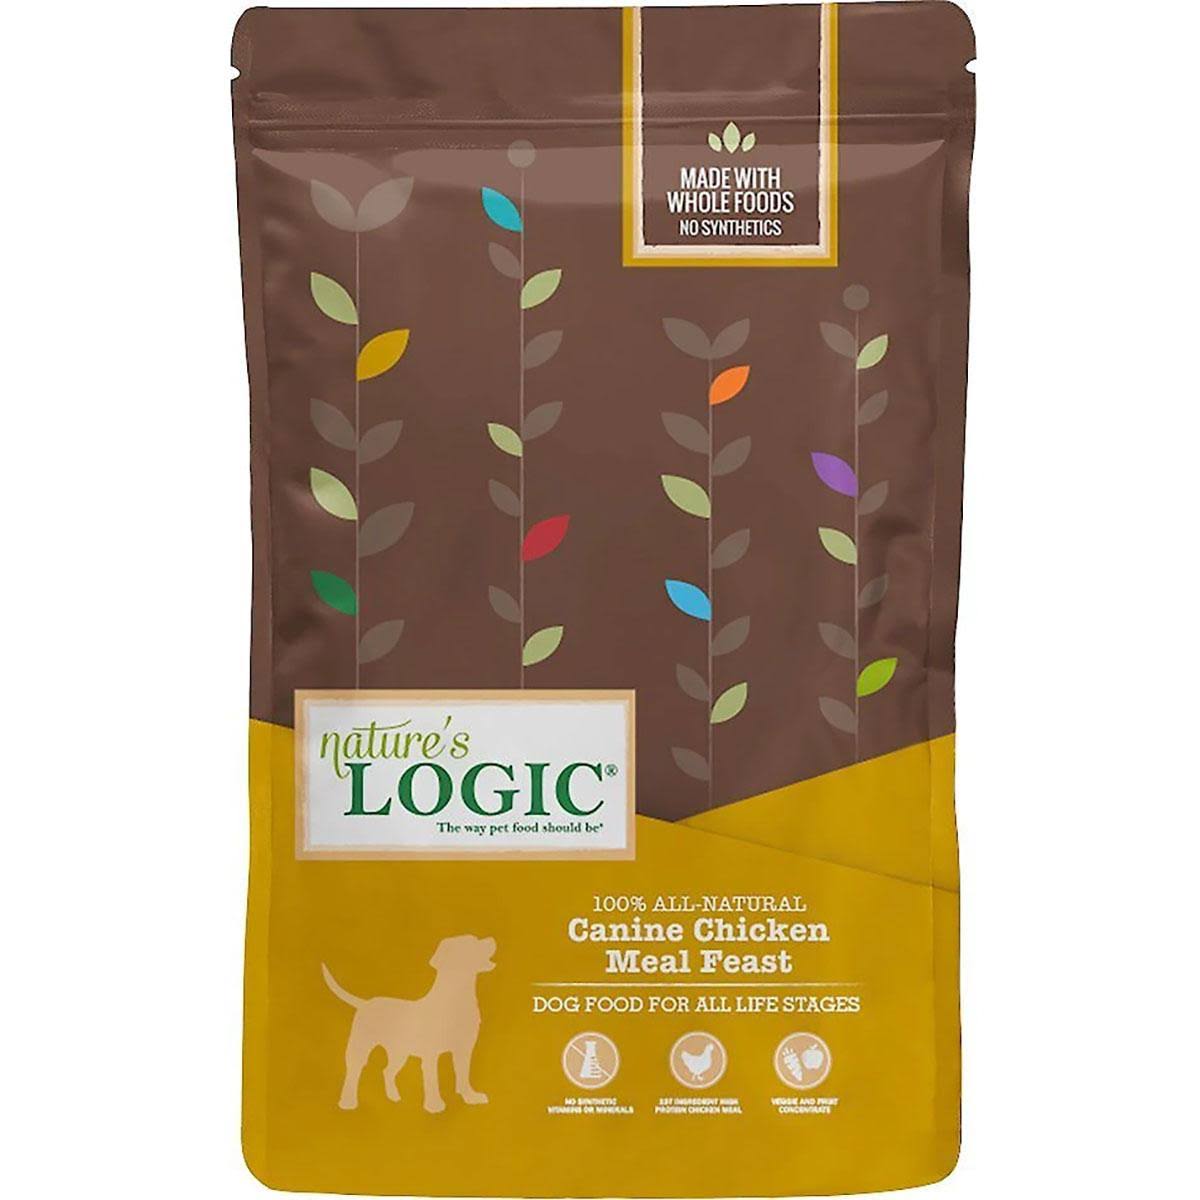 Nature's Logic Canine Chicken Meal Feast Dry Dog Food 13 lbs